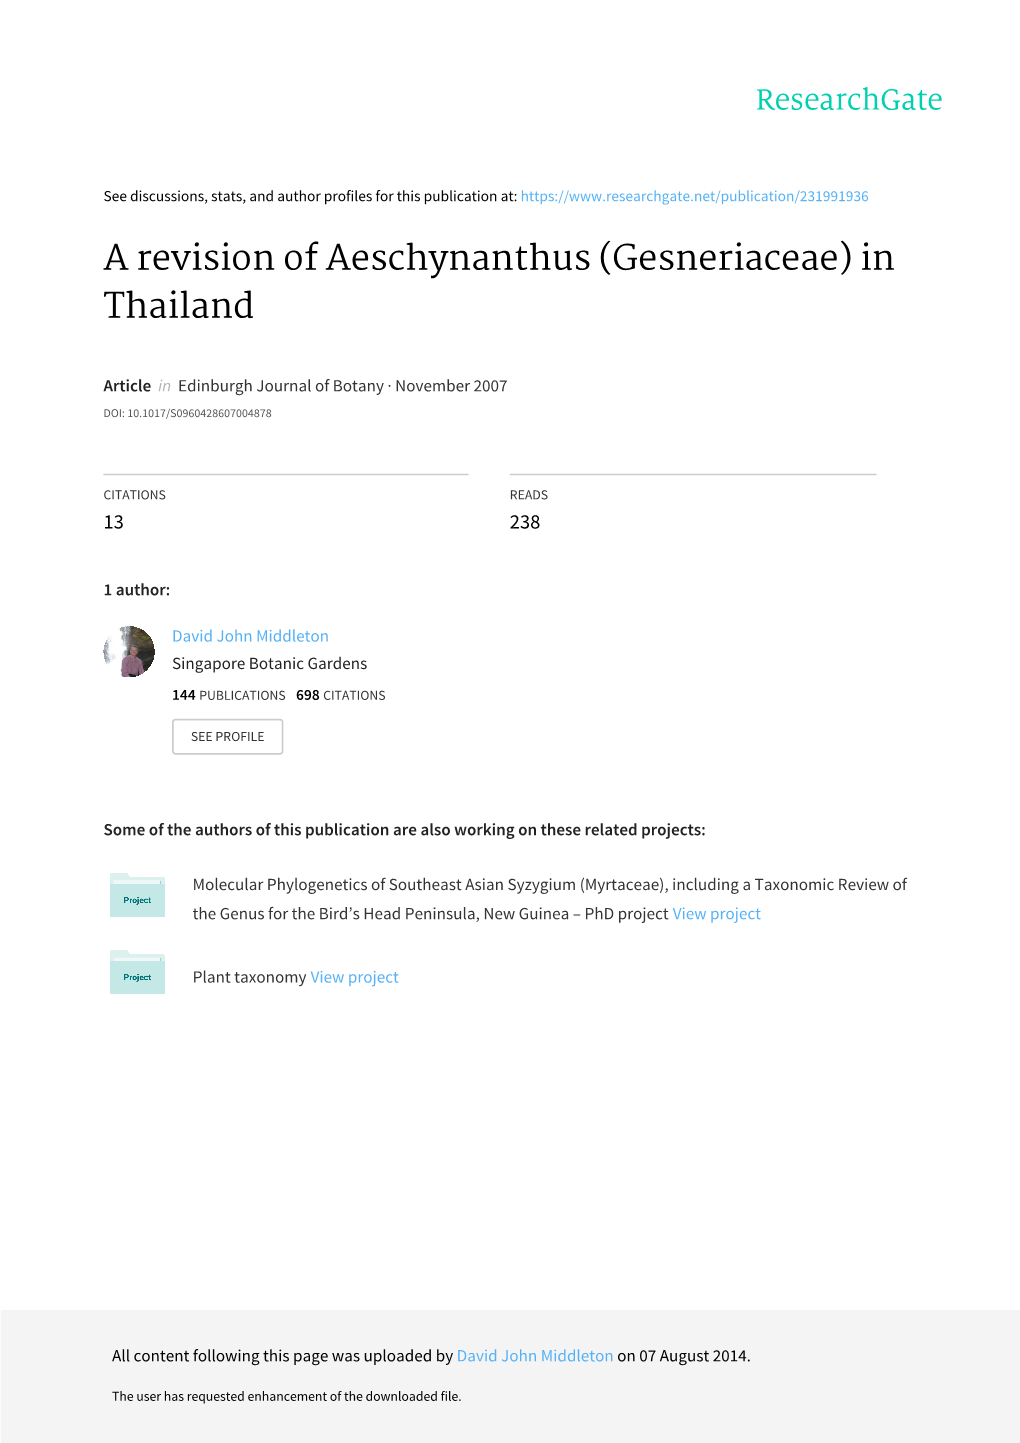 A Revision of Aeschynanthus (Gesneriaceae) in Thailand